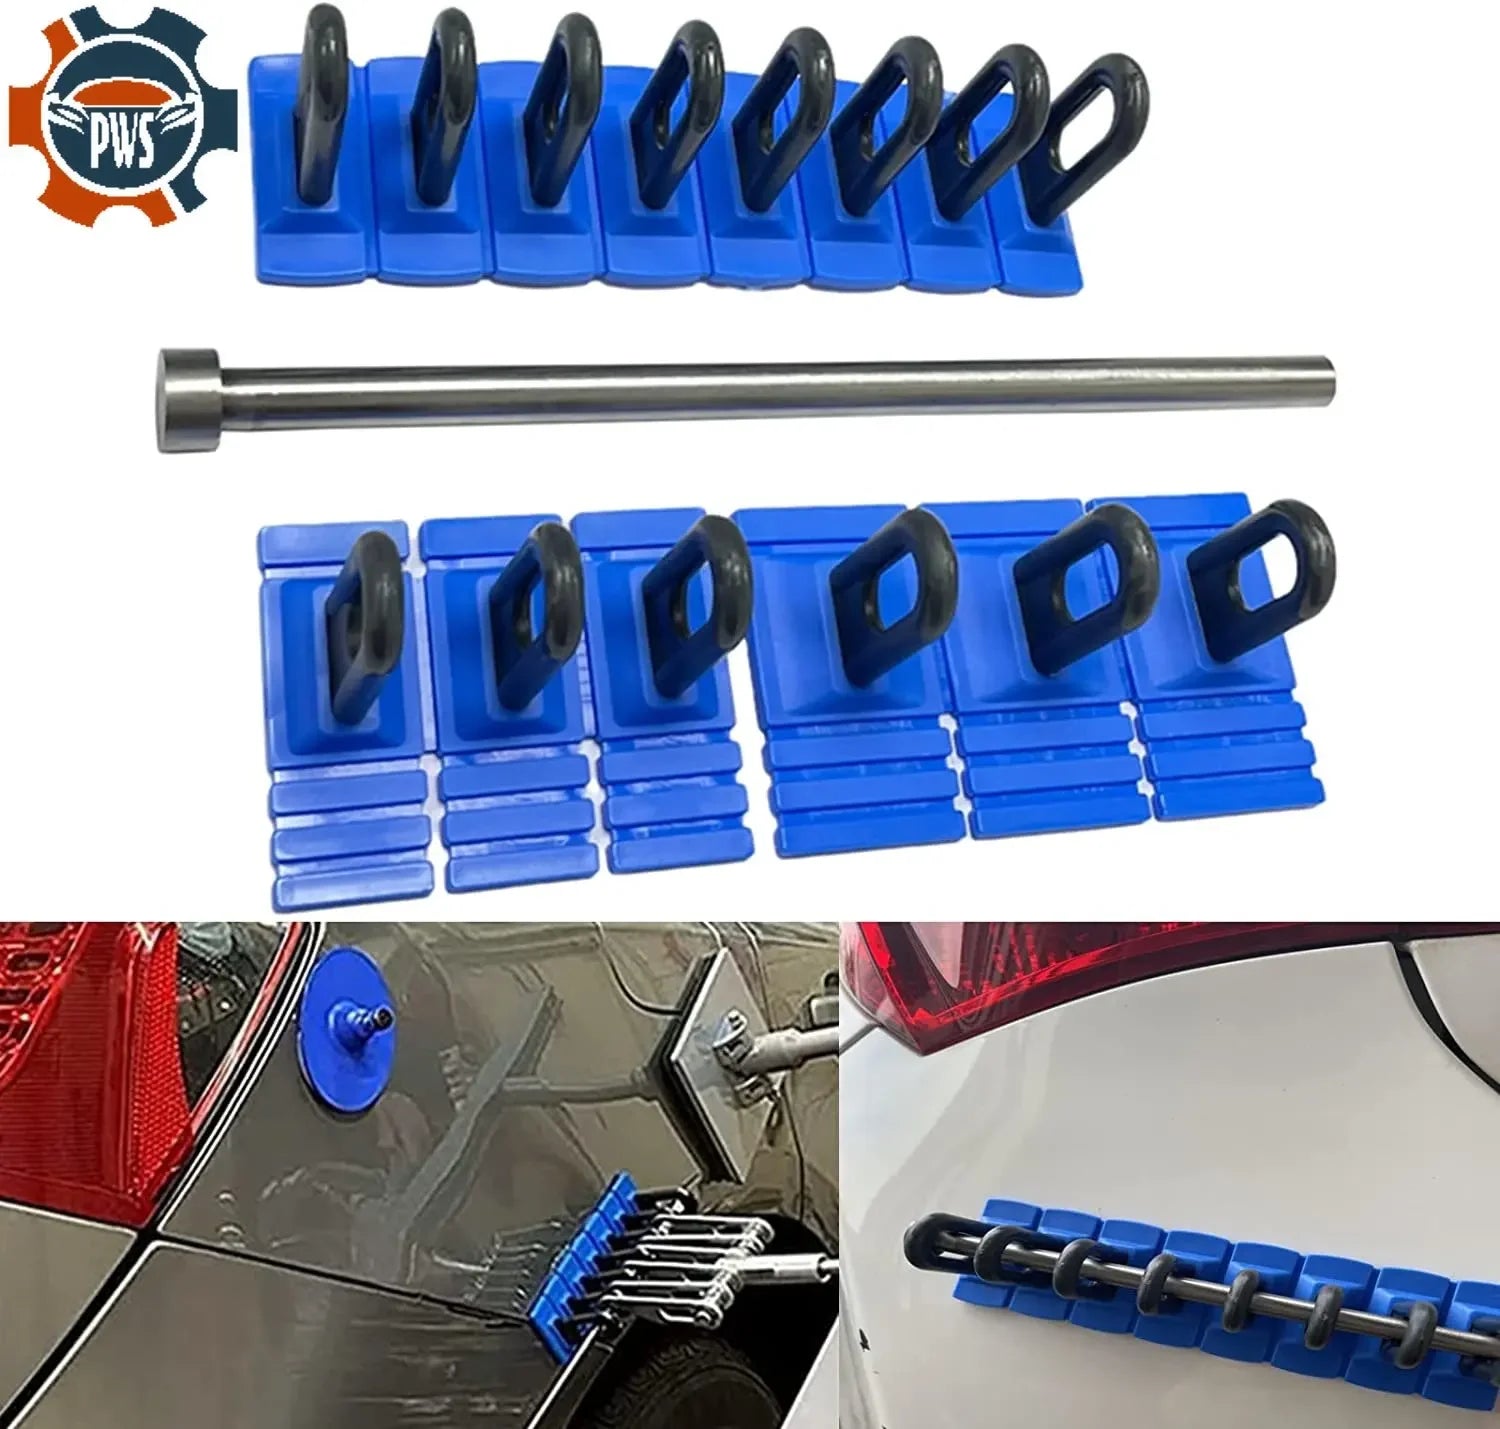 New Car Dent Repair Tool Auto Dent Puller Kit Heavy Duty Cars Body Dent Remover Glue Pulling Tabs Blue Pull tools